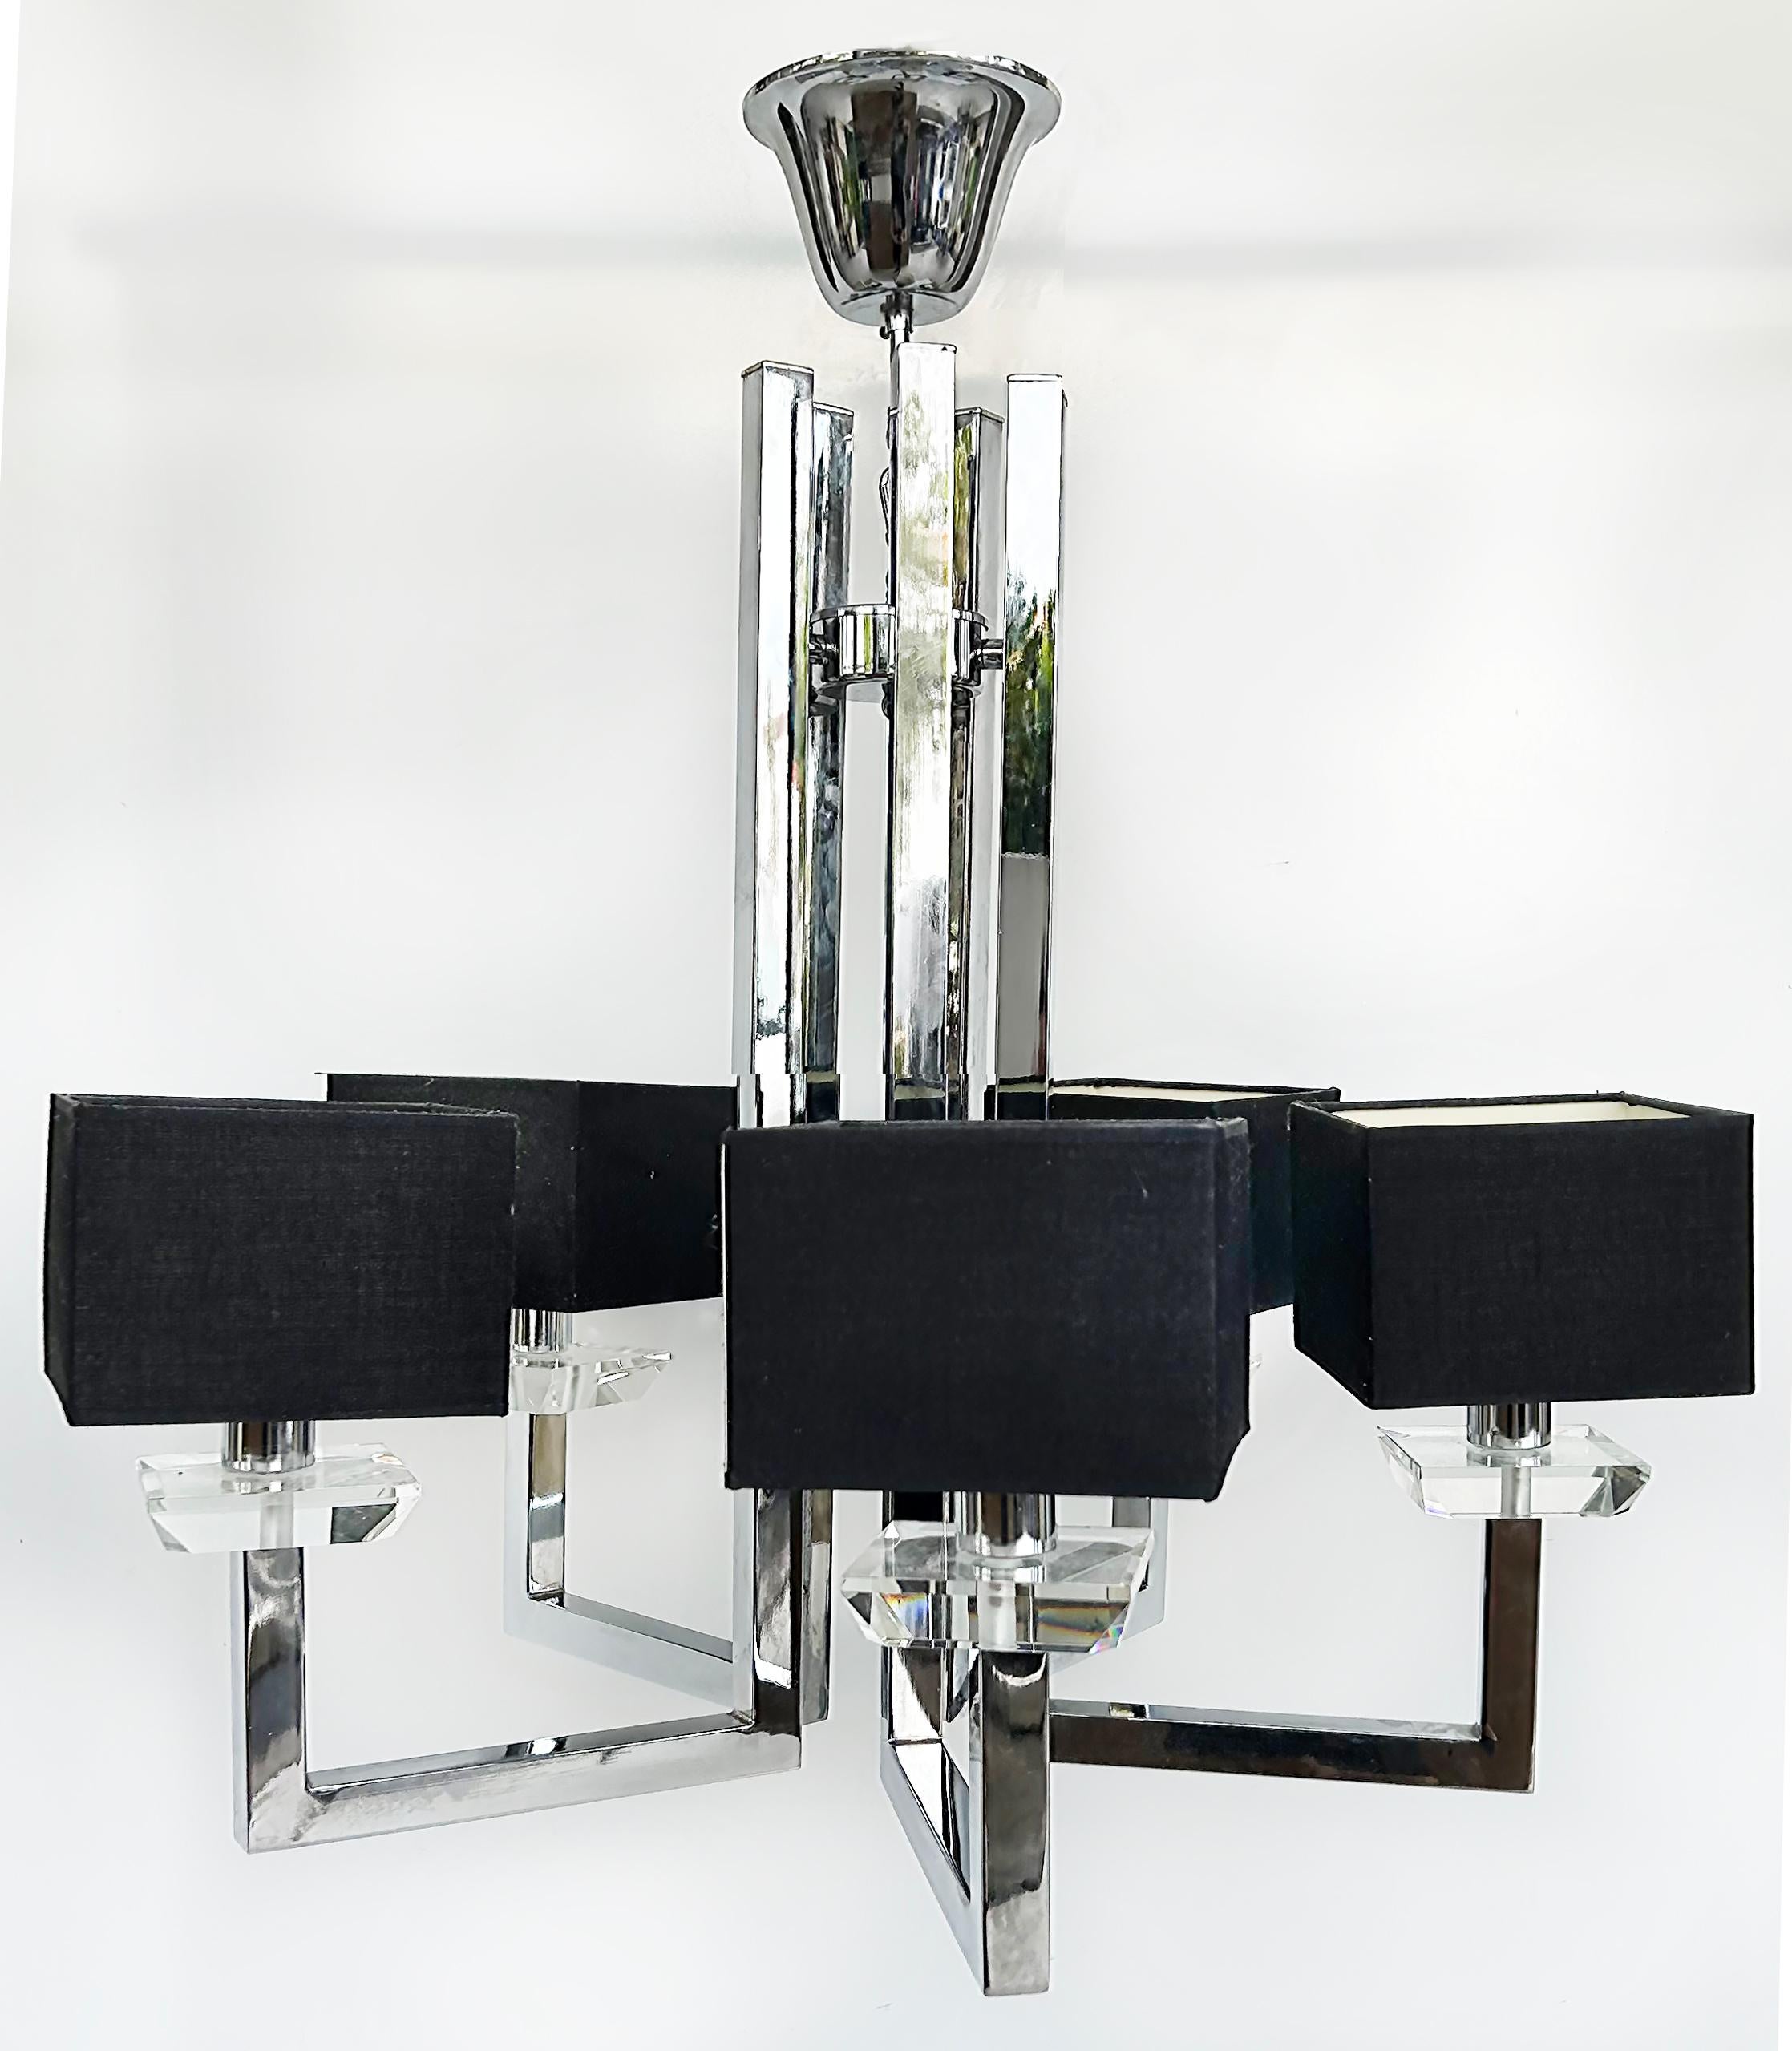 Mid-century Modern Chrome and Lucite 5 Arm Chandelier with Square Shades

Offered for sale is a mid-century modern chrome and lucite five-arm chandelier with square black fabric shades.  The chandelier is wired and in working condition and each arm